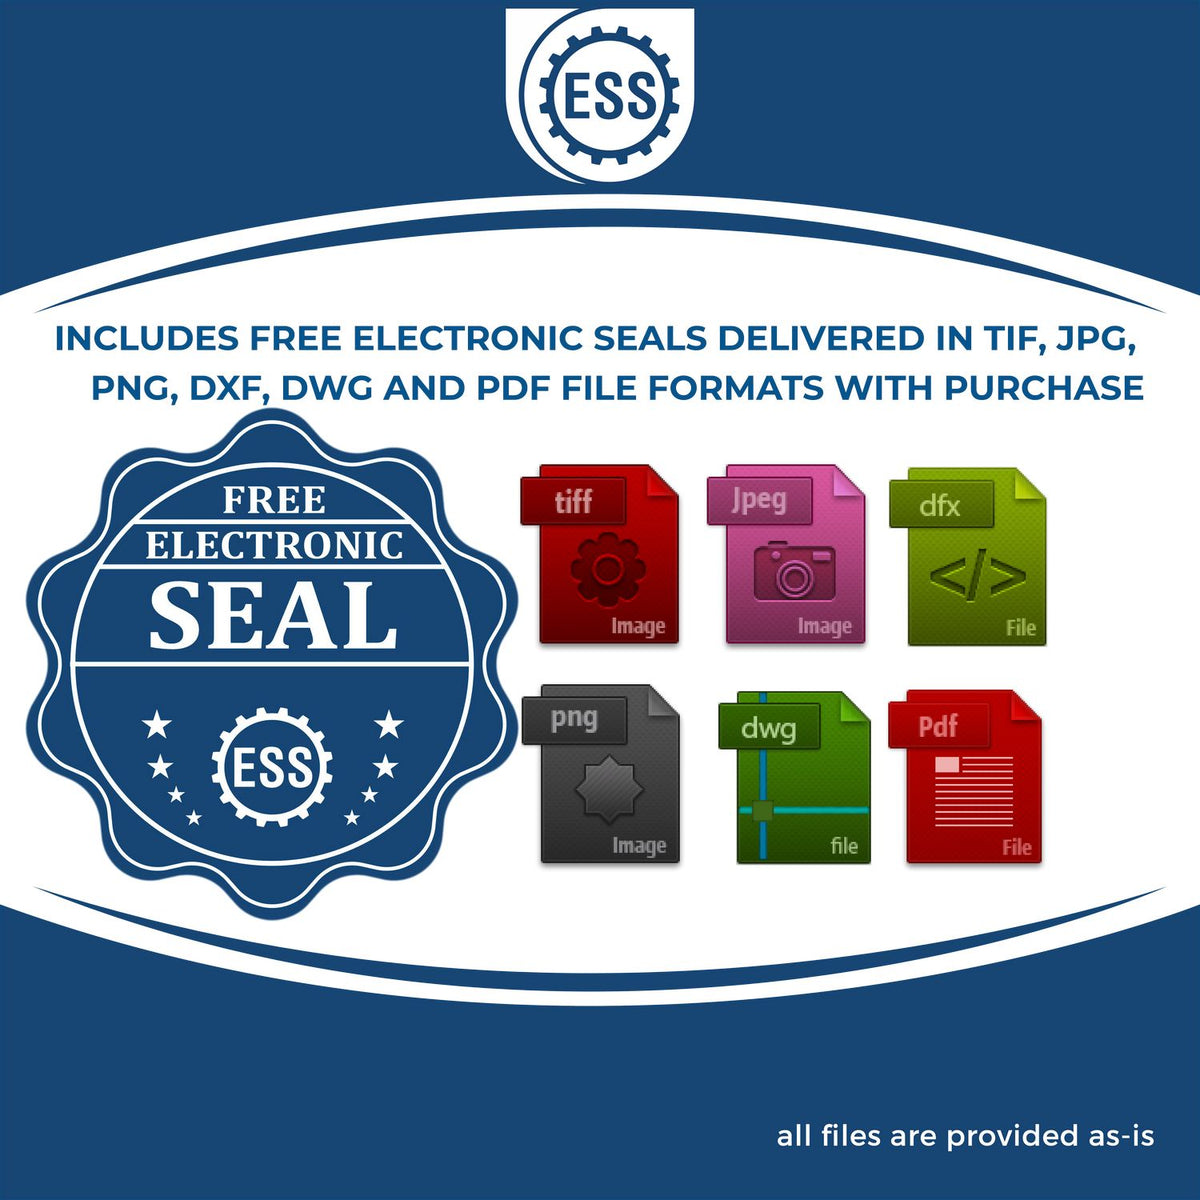 An infographic for the free electronic seal for the Wooden Handle Montana State Seal Notary Public Stamp illustrating the different file type icons such as DXF, DWG, TIF, JPG and PNG.